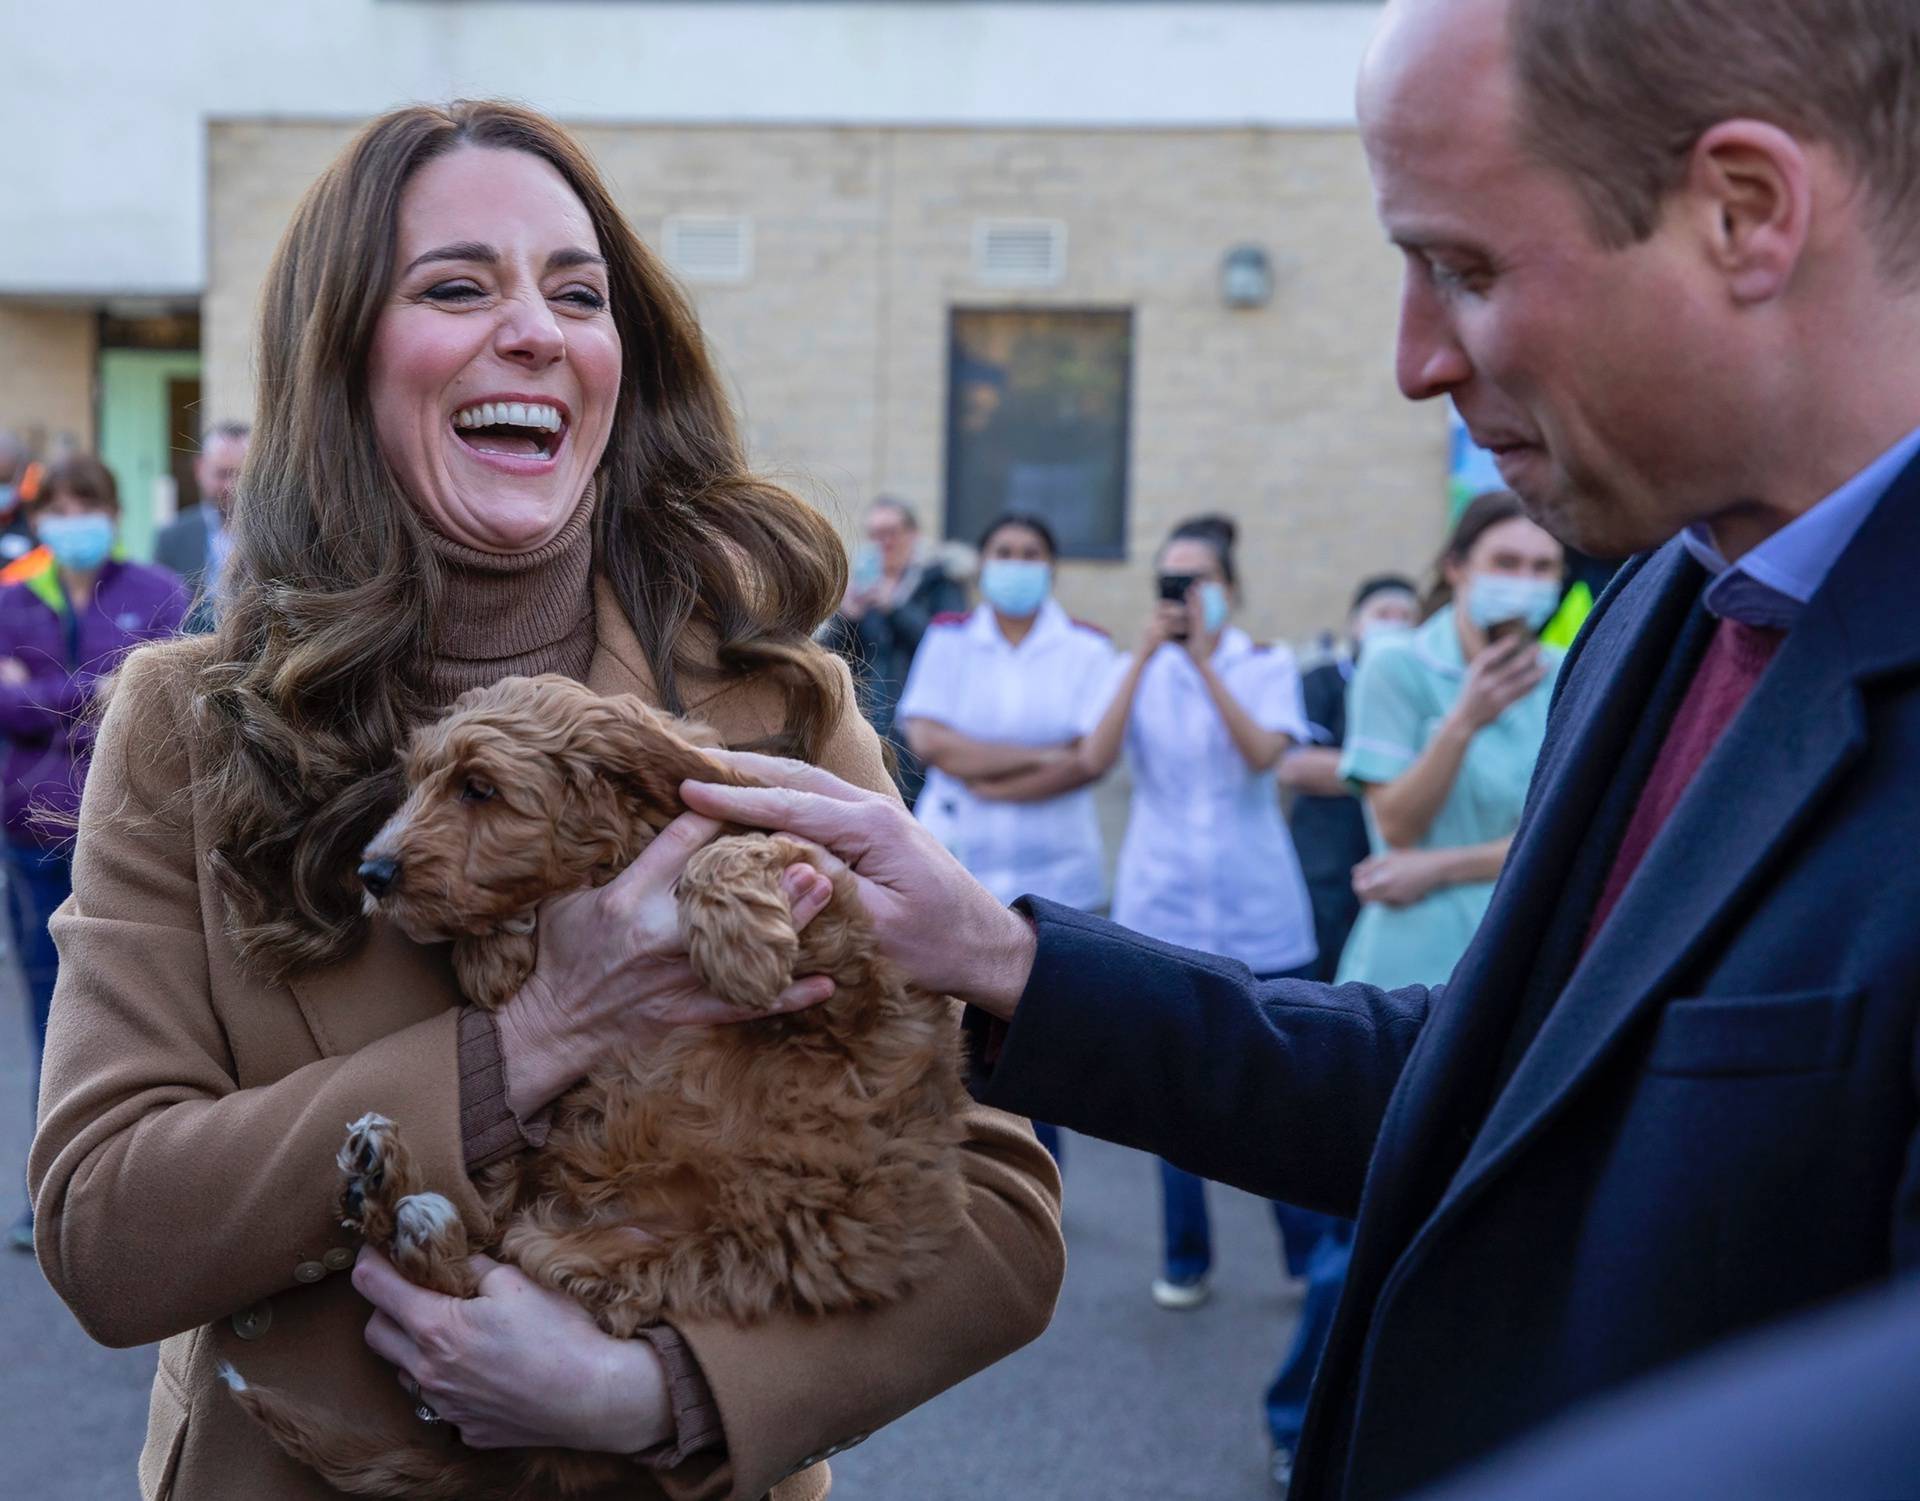 The Duke and Duchess of Cambridge visit NHS staff and patients at Clitheroe Community Hospital